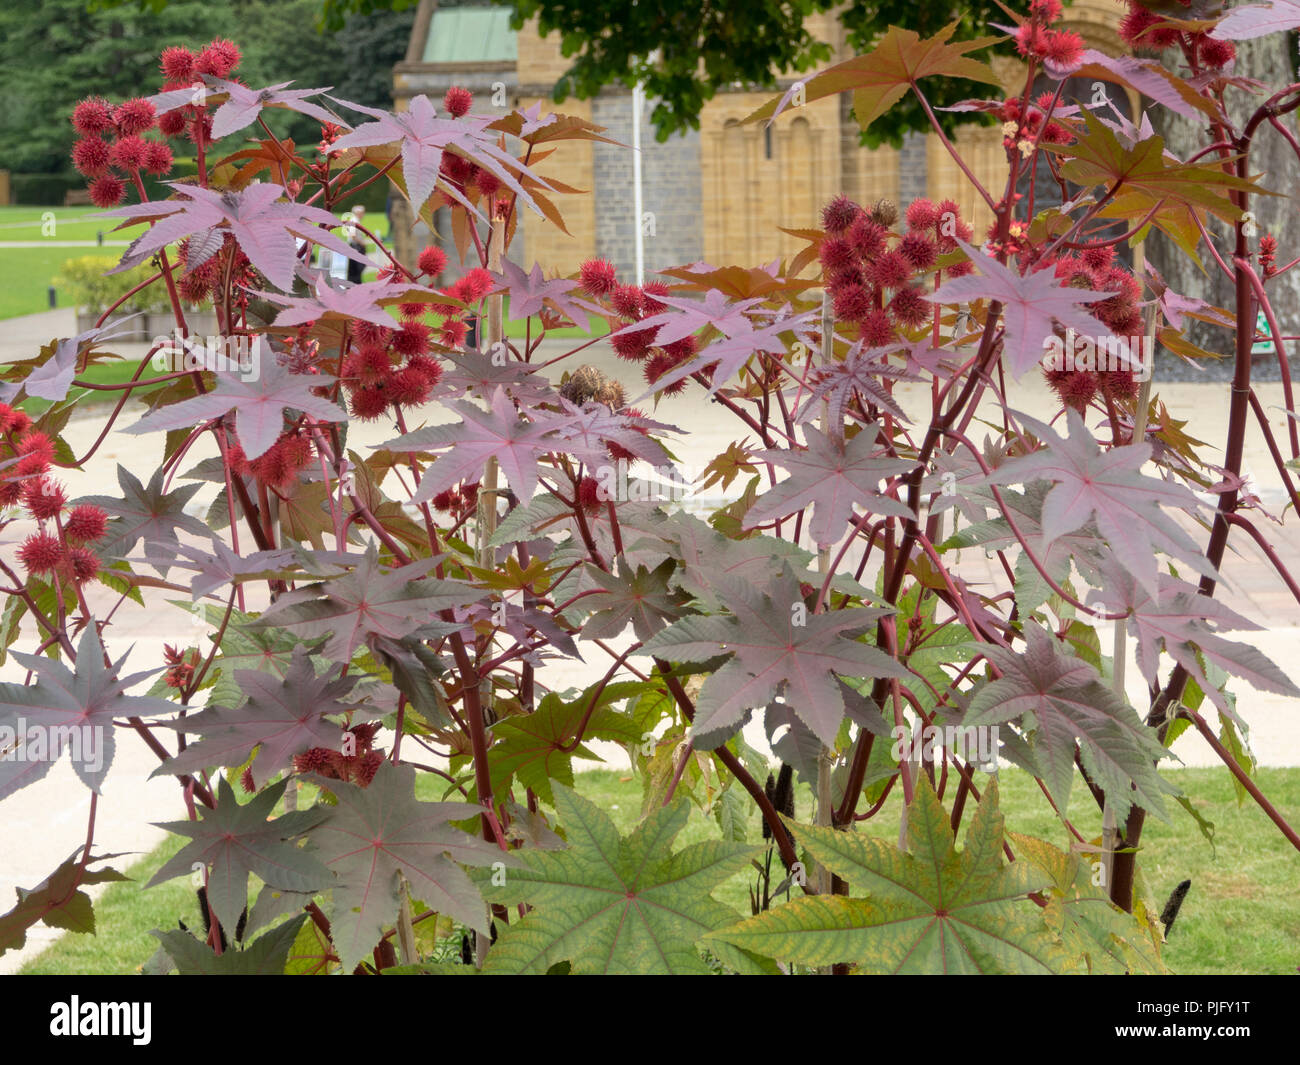 Red bronze foliage and prickly red seedheads of the castor oil plant, Ricinus communis 'Purpurea' Stock Photo